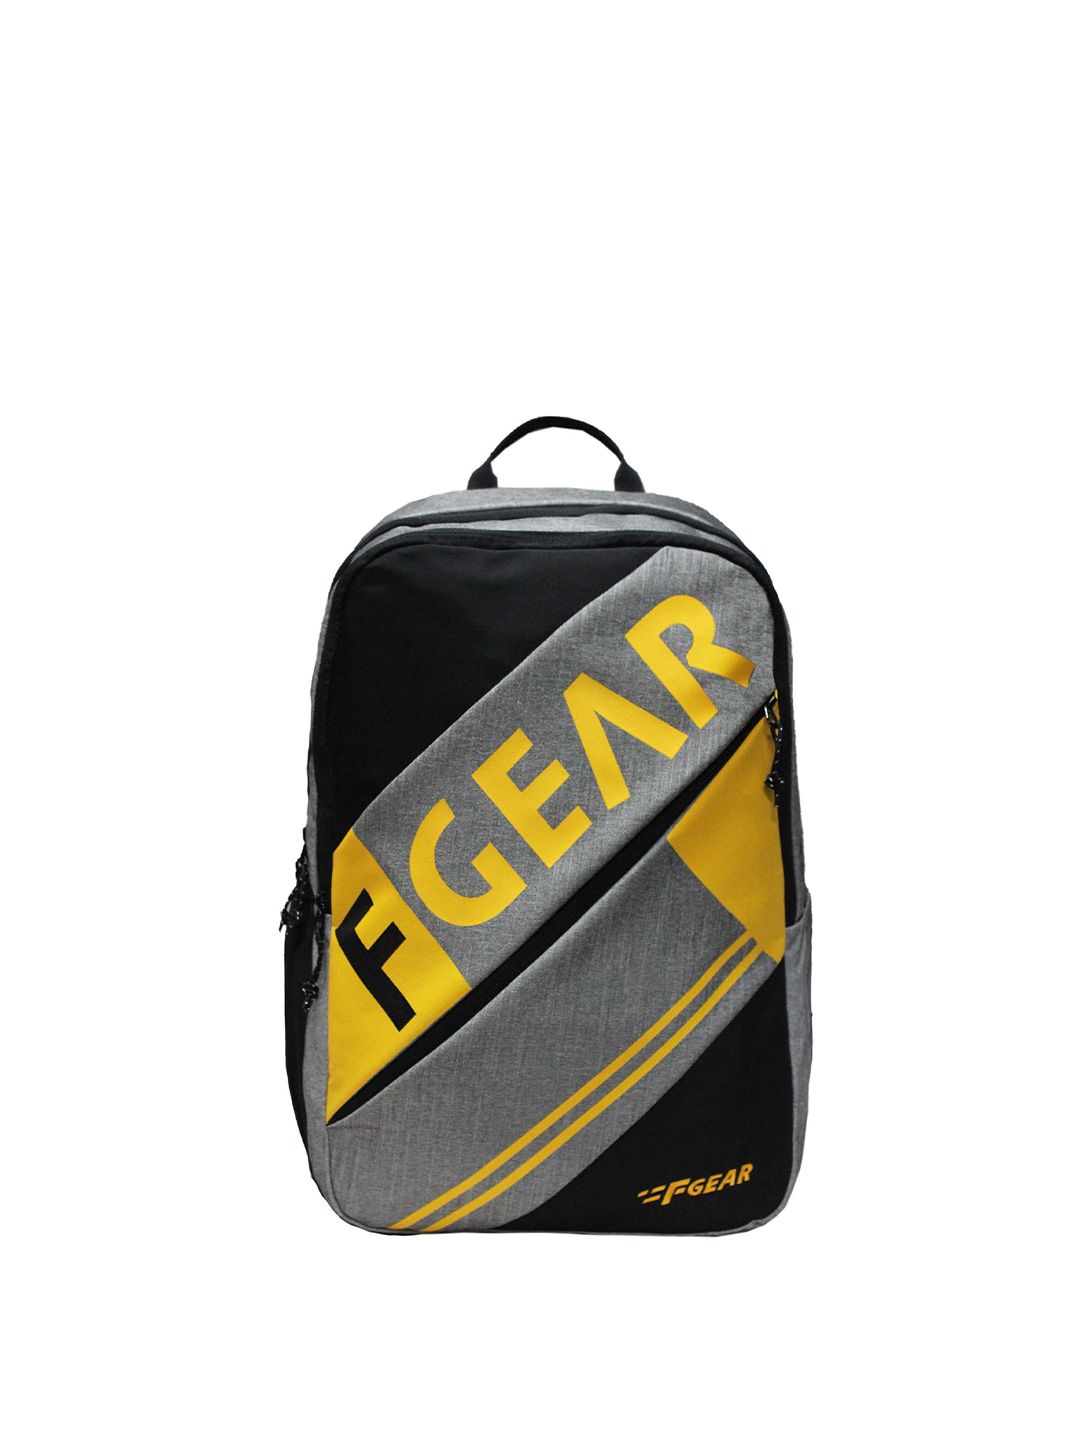 F Gear Unisex Grey Colourblocked Laptop Backpack Price in India